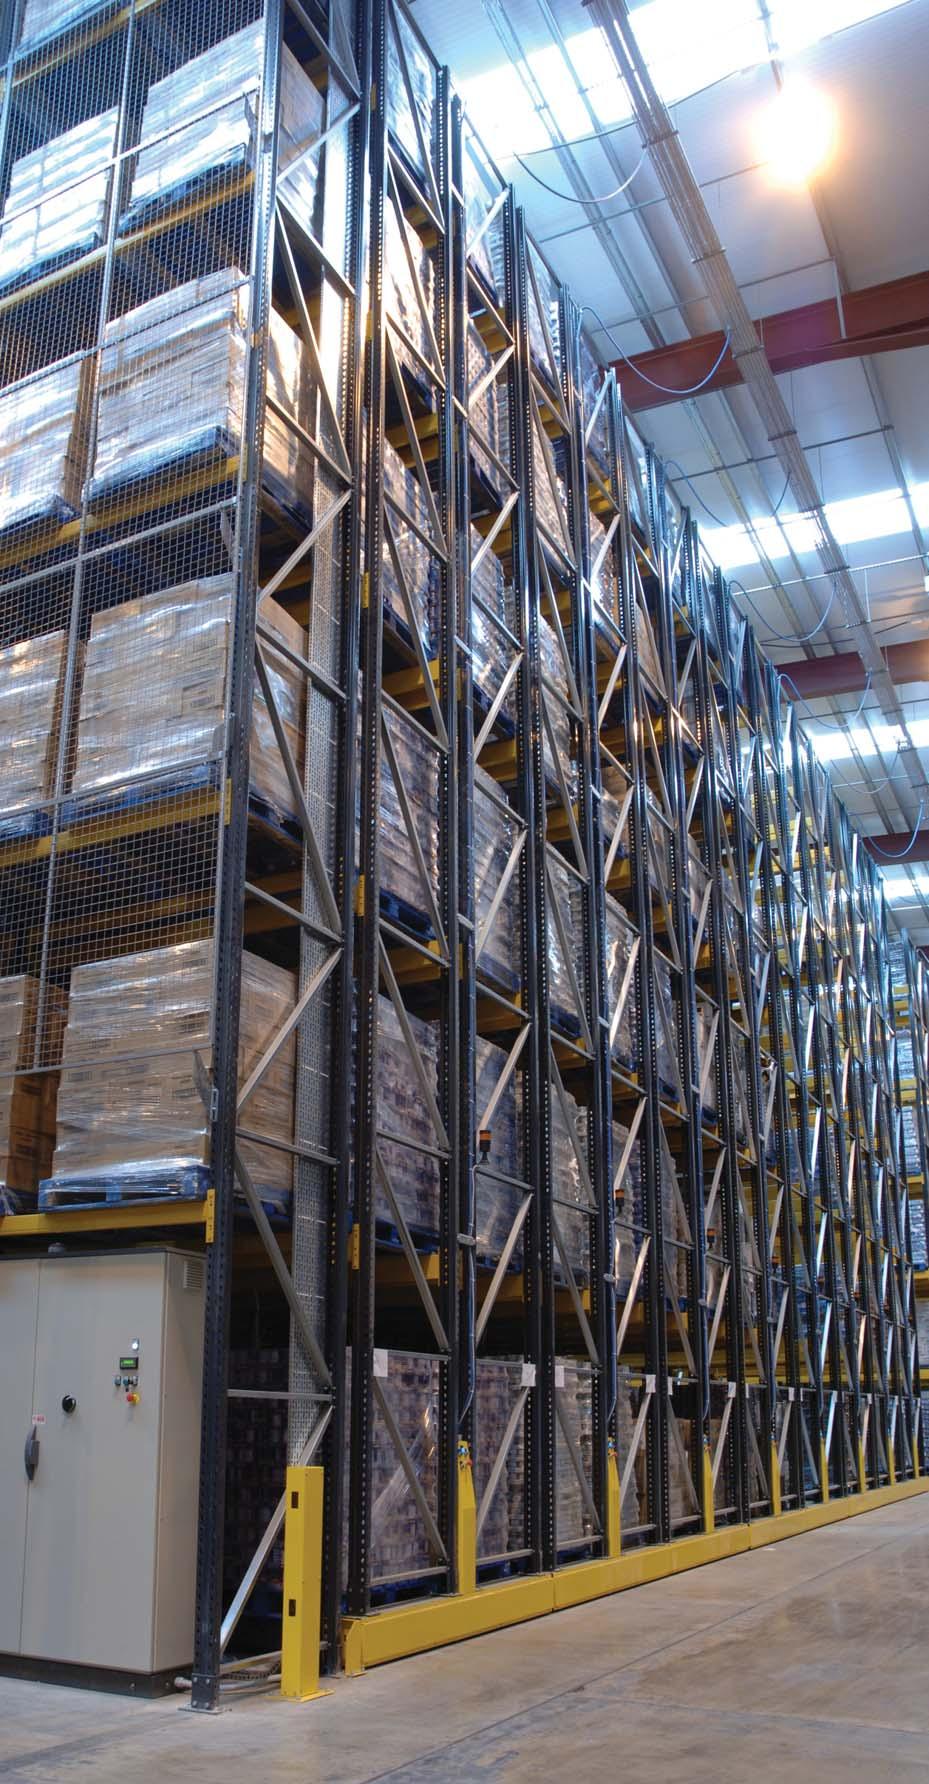 powered mobile pallet racking Link 51 s XL racking is easily configured for